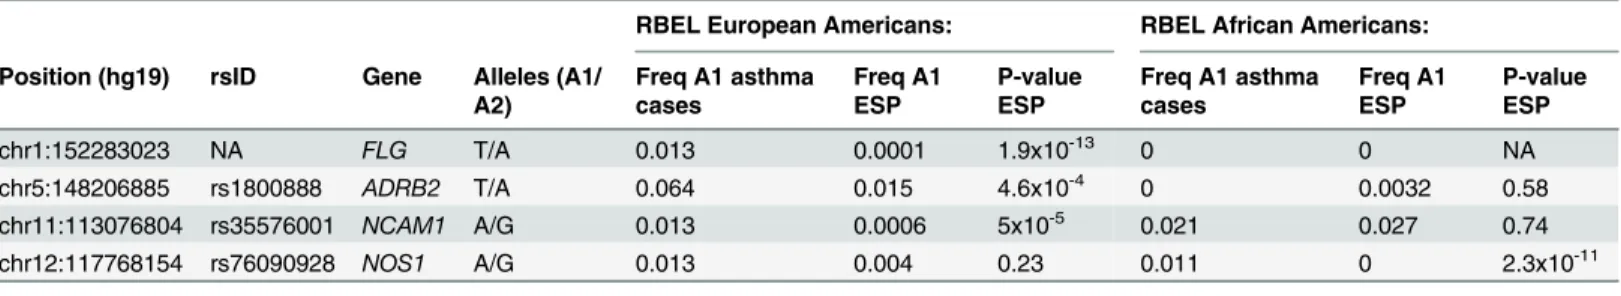 Table 4. Results of allelic association testing for physician-diagnosed asthma following severe RSV bronchiolitis in infancy including genotypes from the Exome Sequencing Project (ESP) as controls.